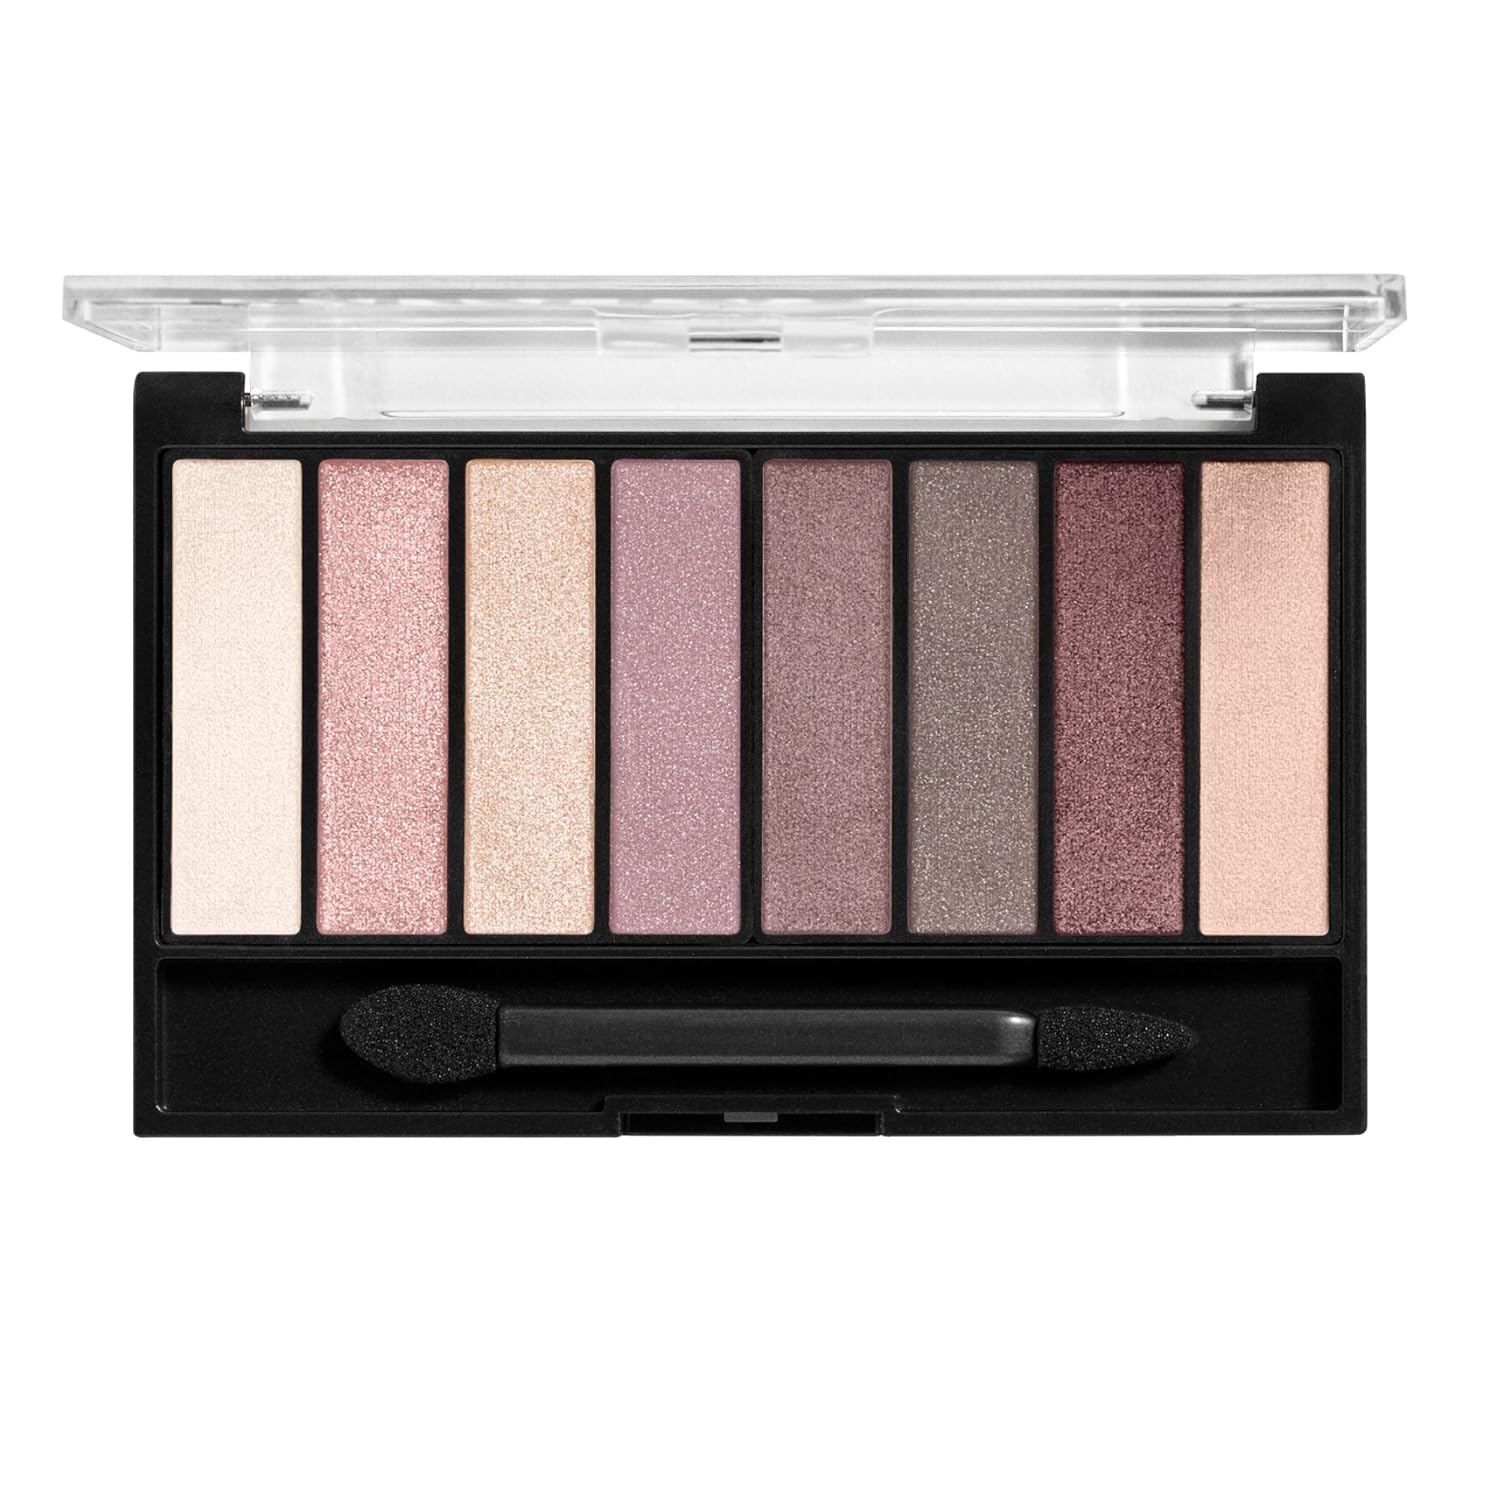  COVERGIRL Trunaked Eyeshadow Palette, Roses 815, 0.23 Ounce (Packaging May Vary), Pack of 1